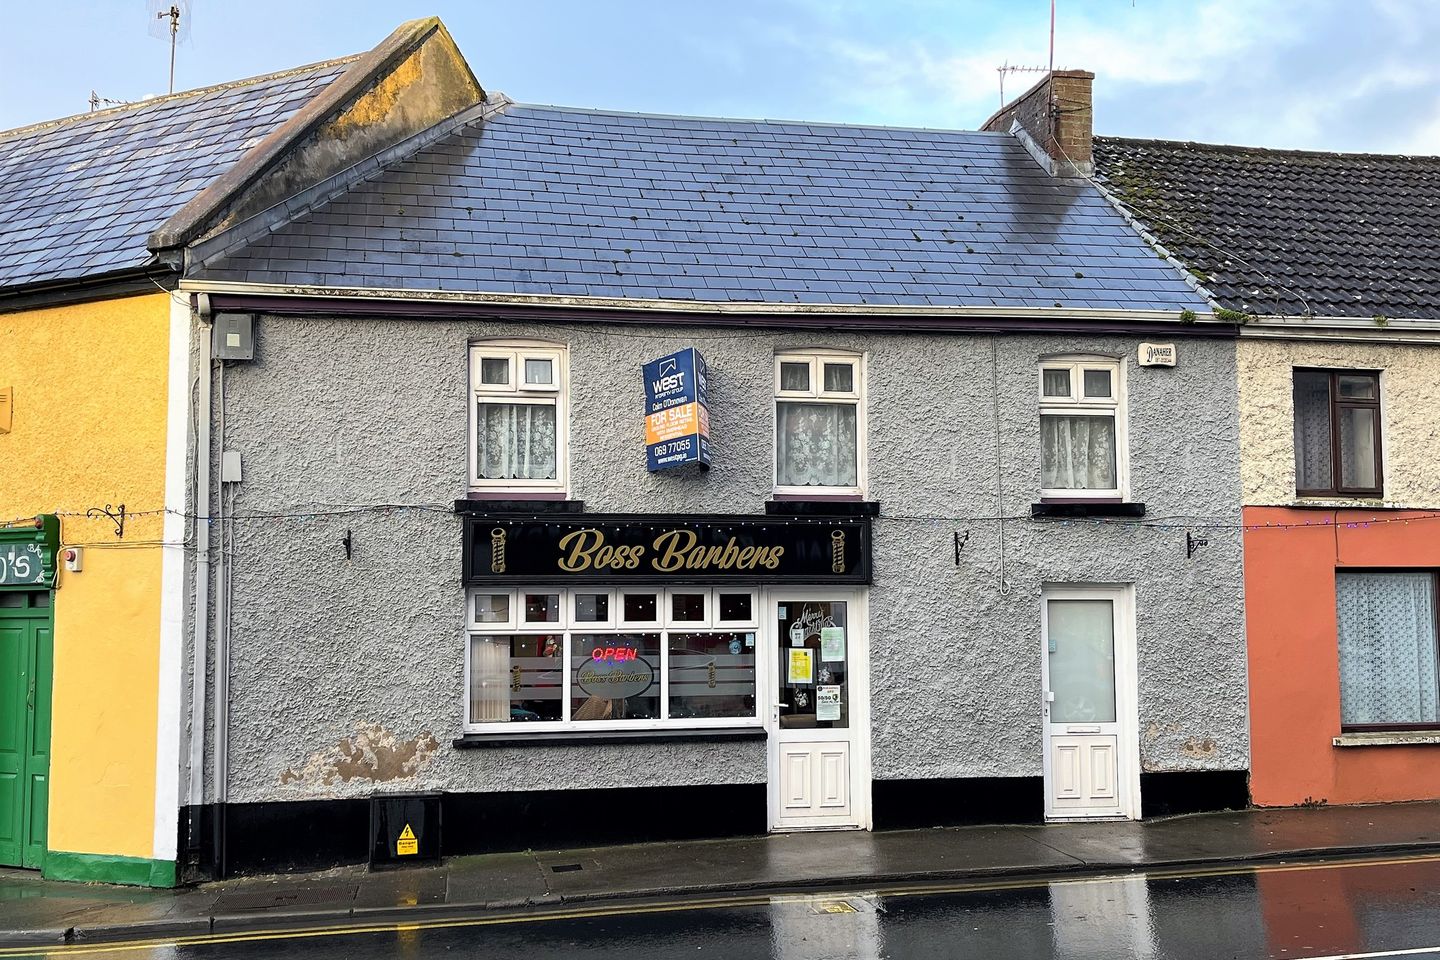 BOSS HAIR SALON, East Square, Askeaton, Co. Limerick is for sale on 